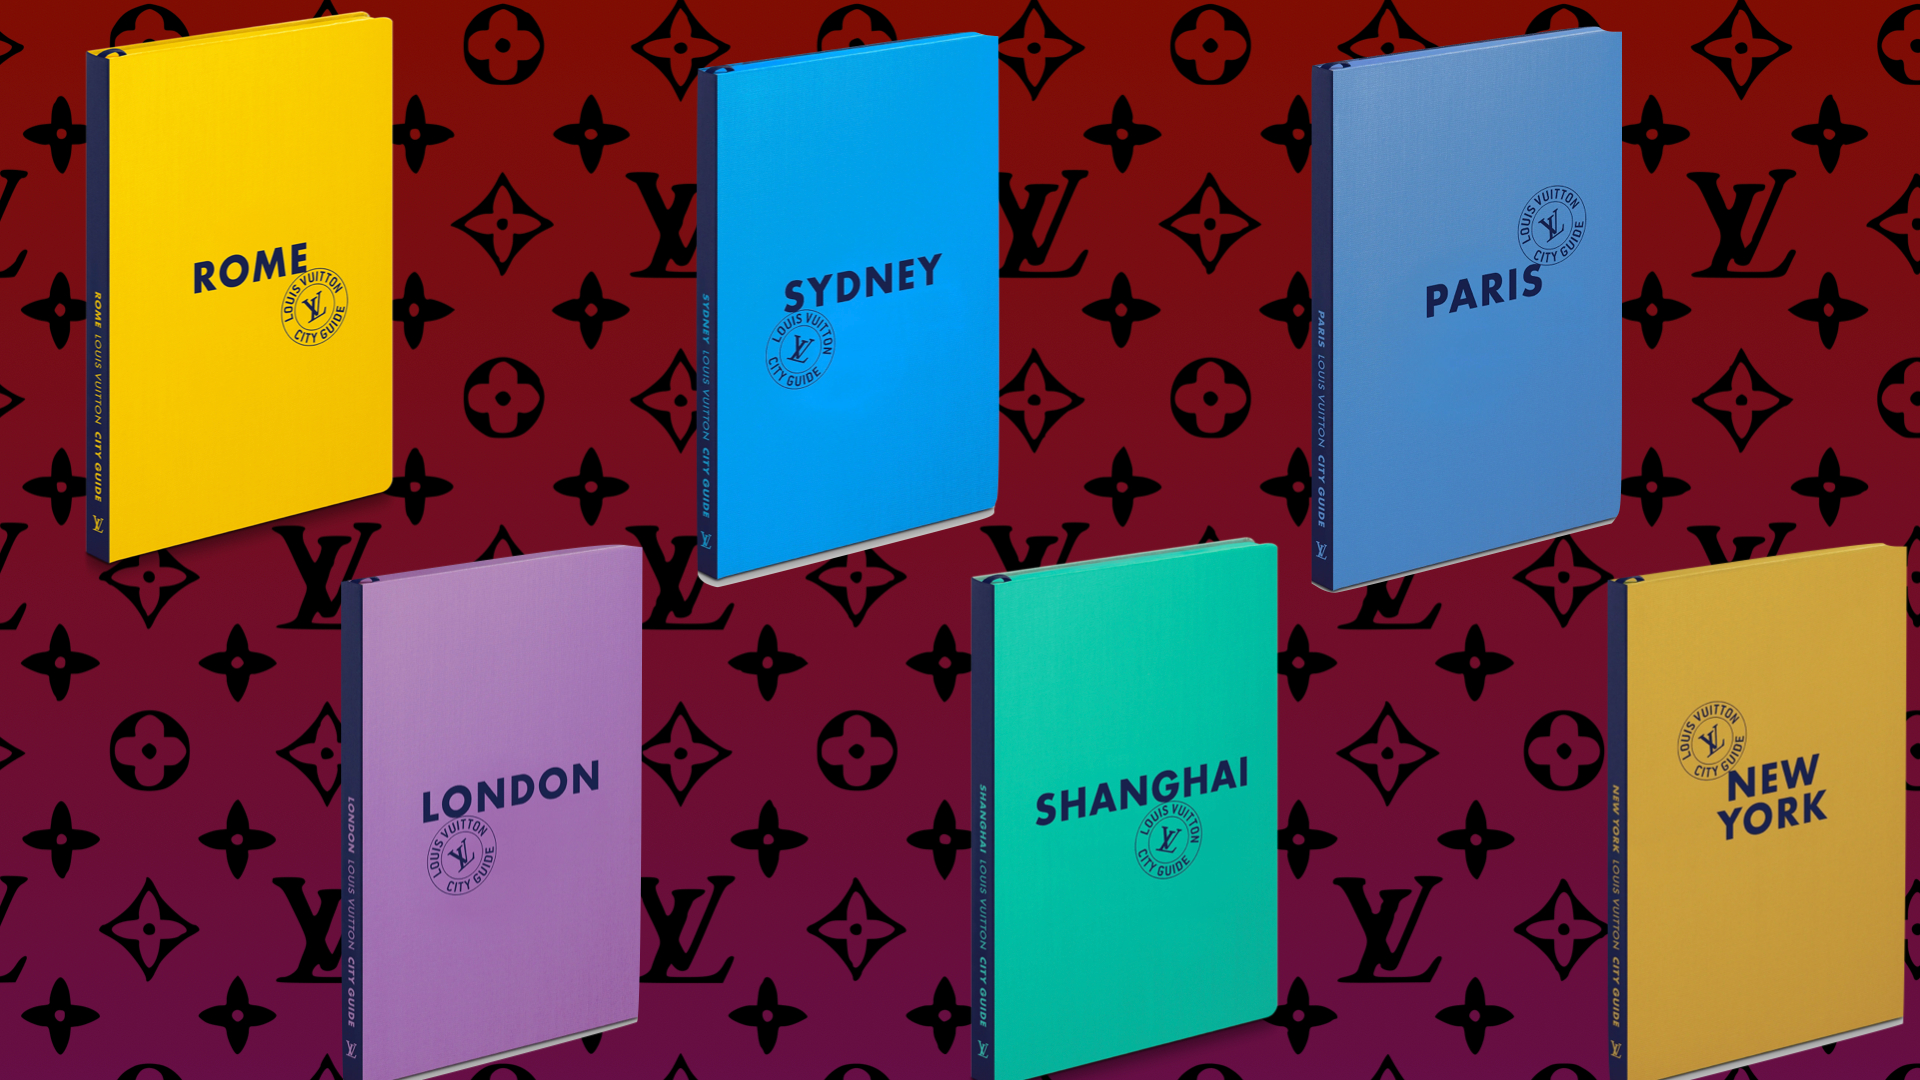 Louis Vuitton Publishes 2021 City Guides and Fashion Eye Books